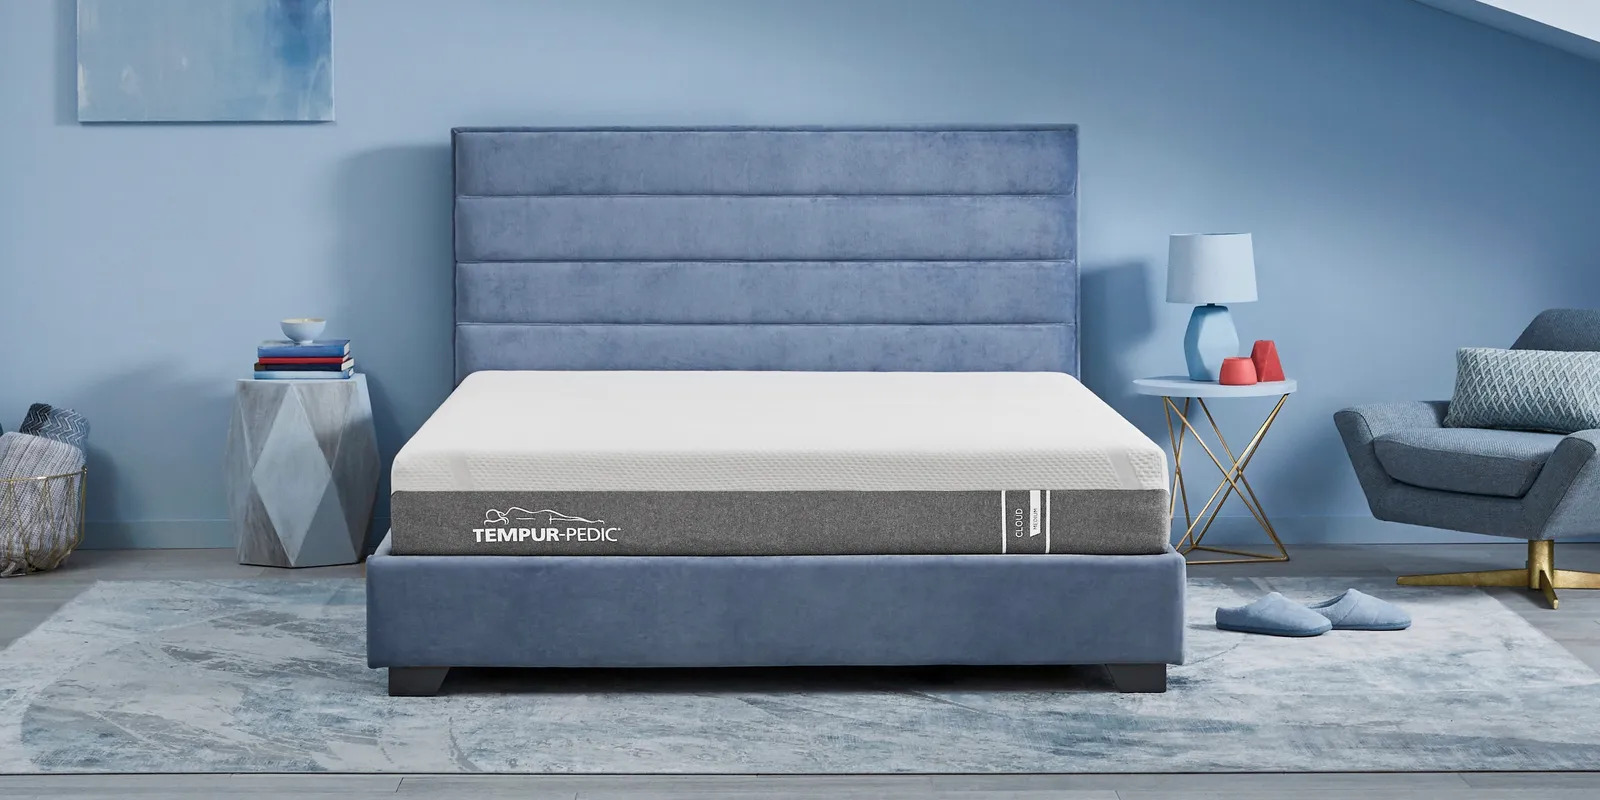 How To Get A Free Mattress From Medicare